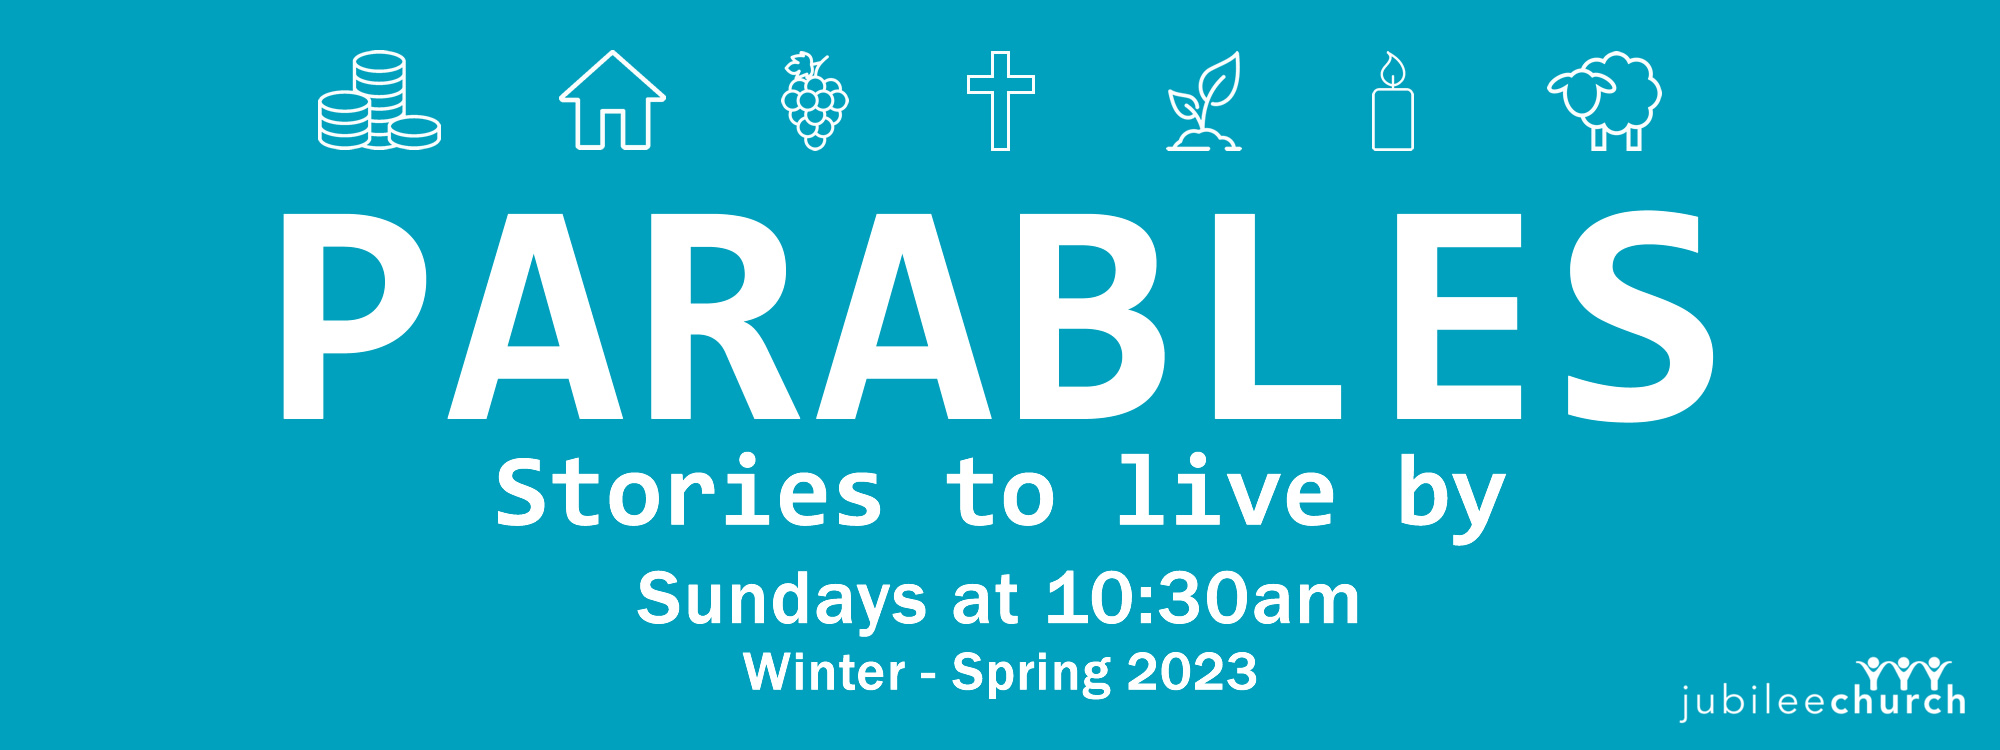 Parables Banner